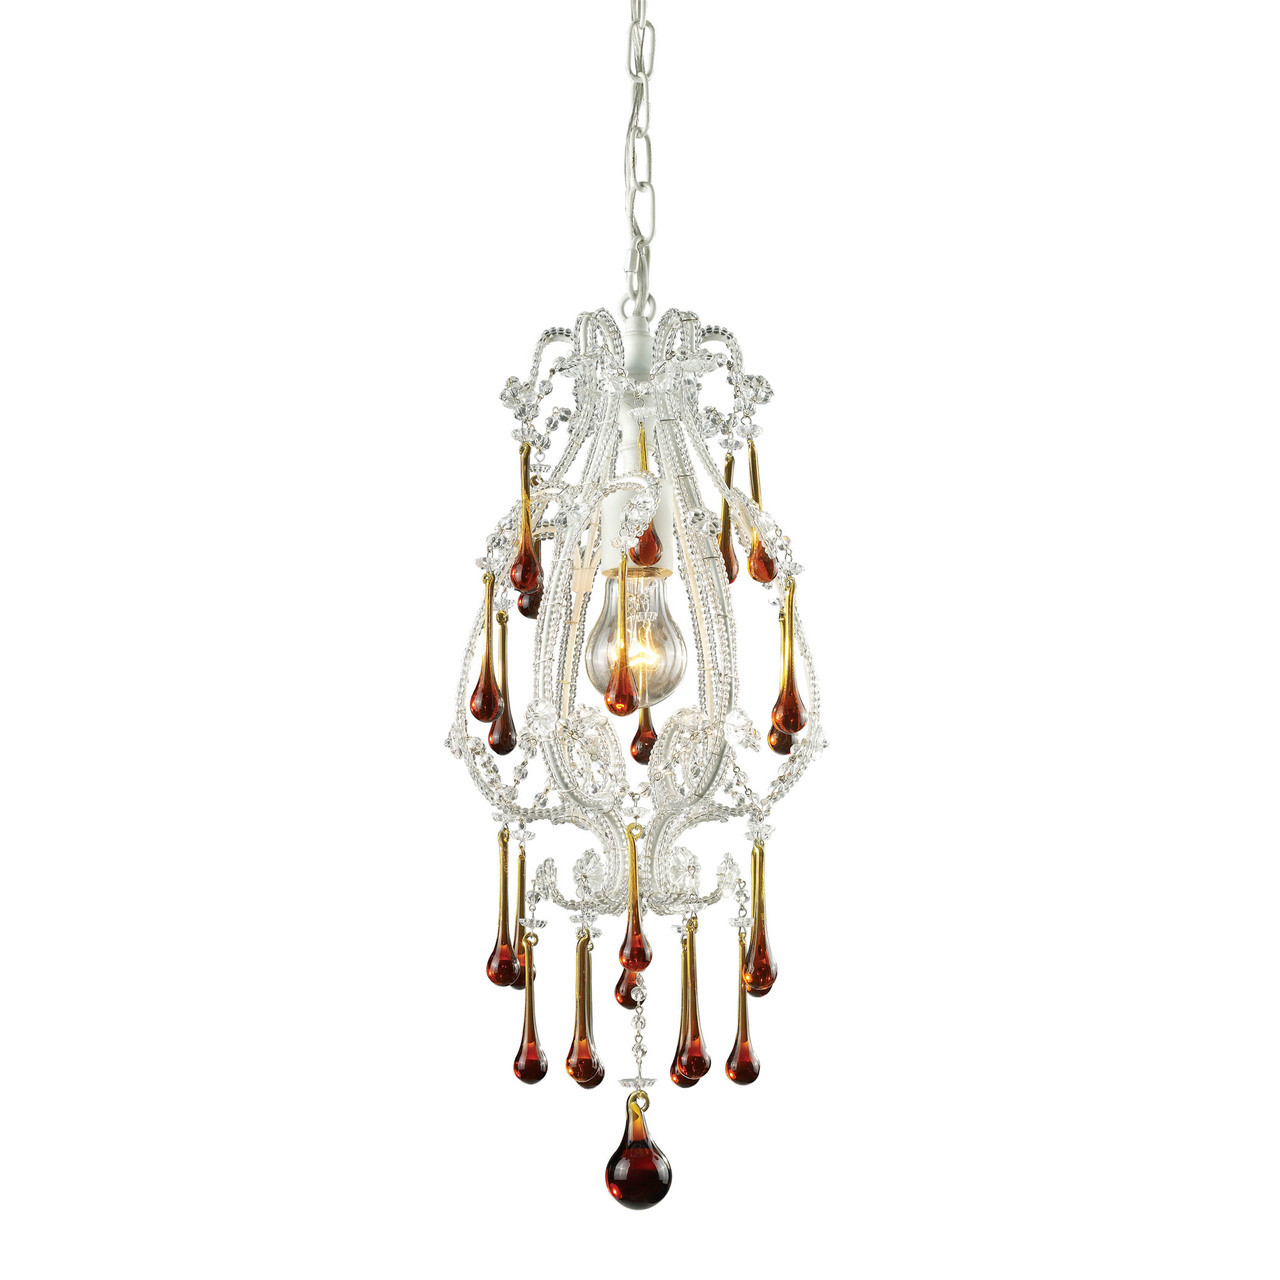 ELK LIGHTING 12003/1AMB Opulence 1 Light Pendant In Antique White And Amber Crystal